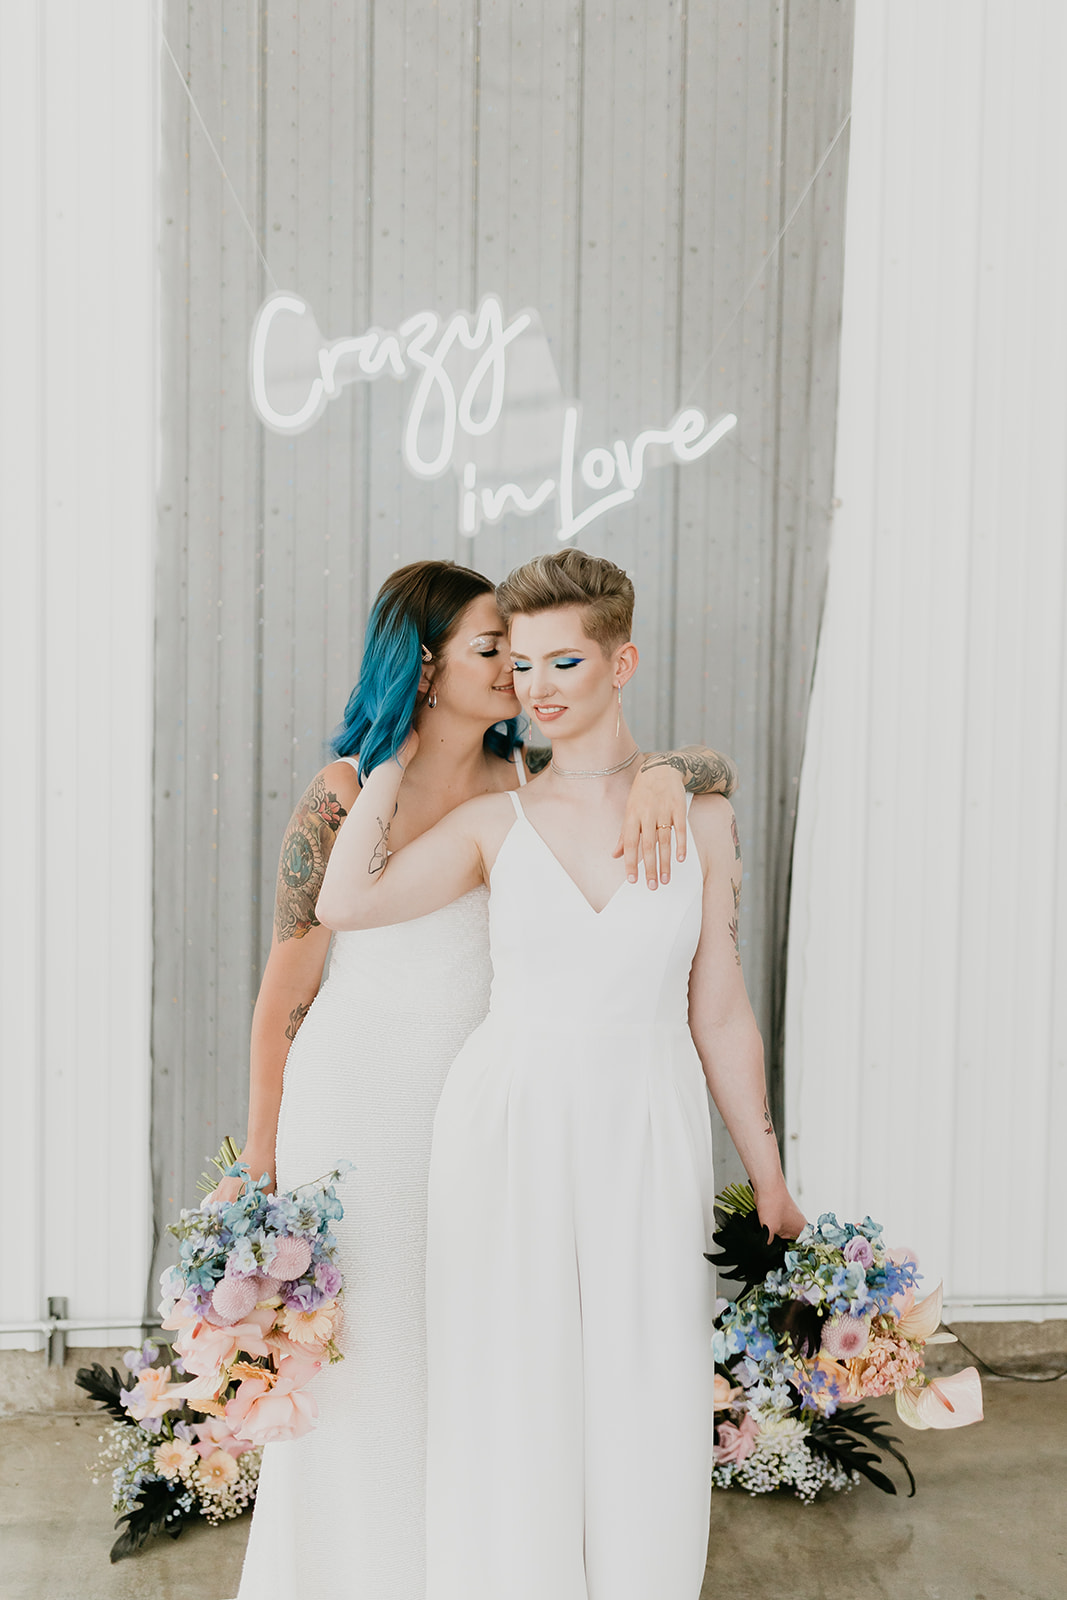 Rocker style brides show off their bridal bouquets and bridal style